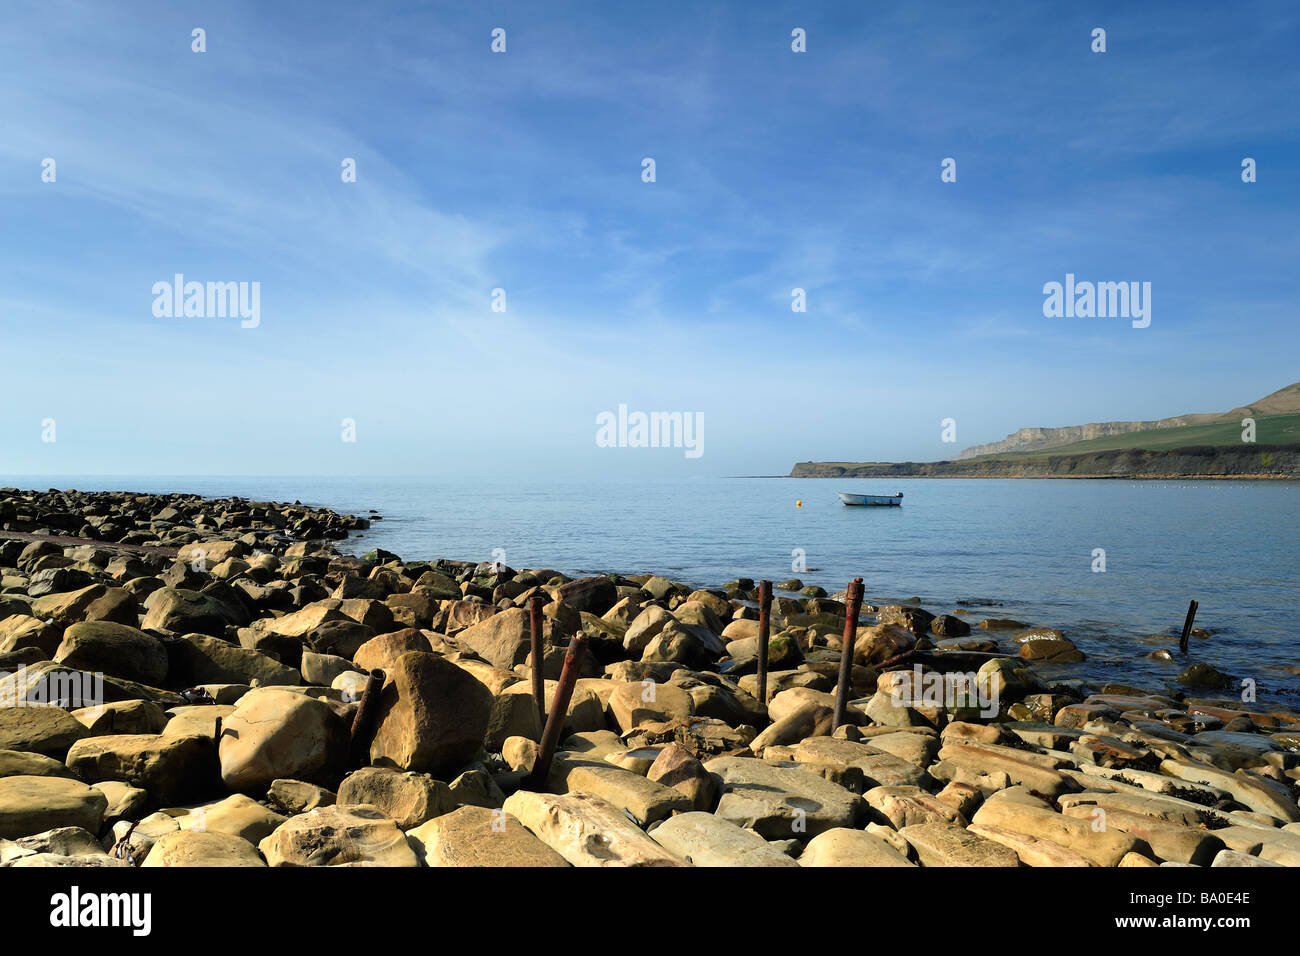 KIMMERIDGE BAY, DORSET, UK- MARCH 16, 2009:  View of an empty rocky beach with dinghy moored in the bay Stock Photo